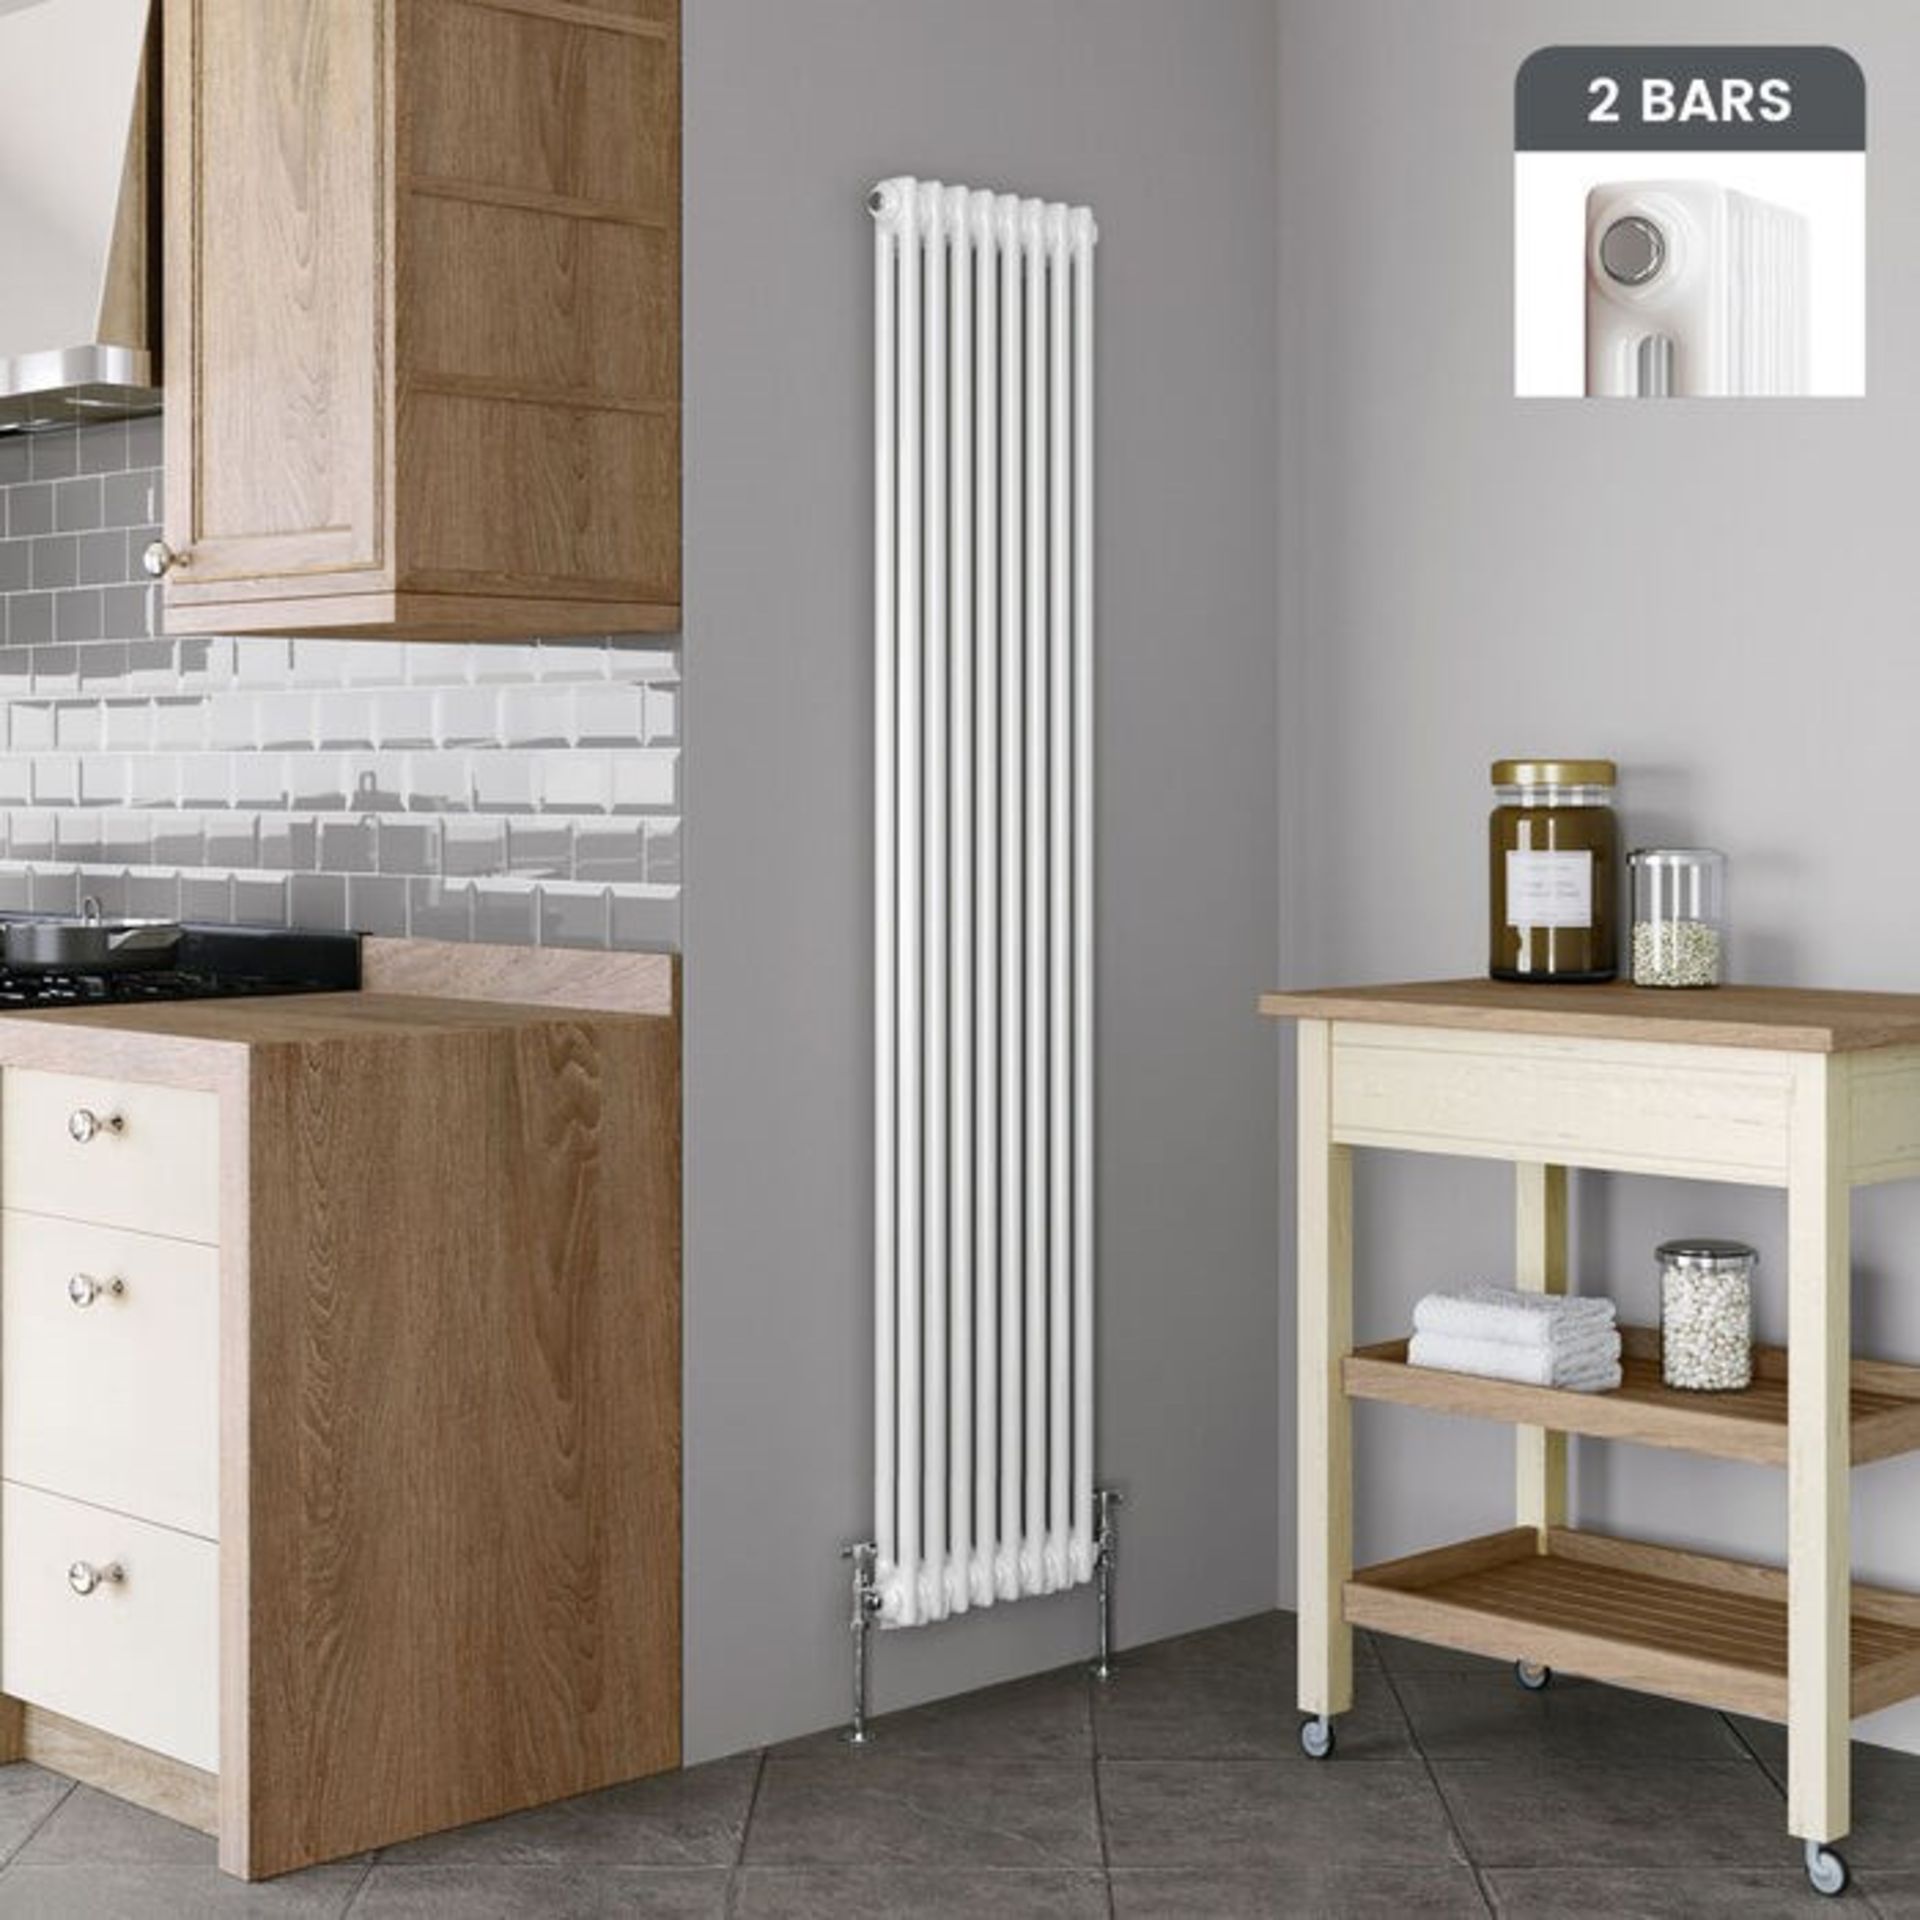 DD112) 2000x350mm White Double Panel Vertical Colosseum Traditional Radiator.RRP £429.99.For a... - Image 3 of 3